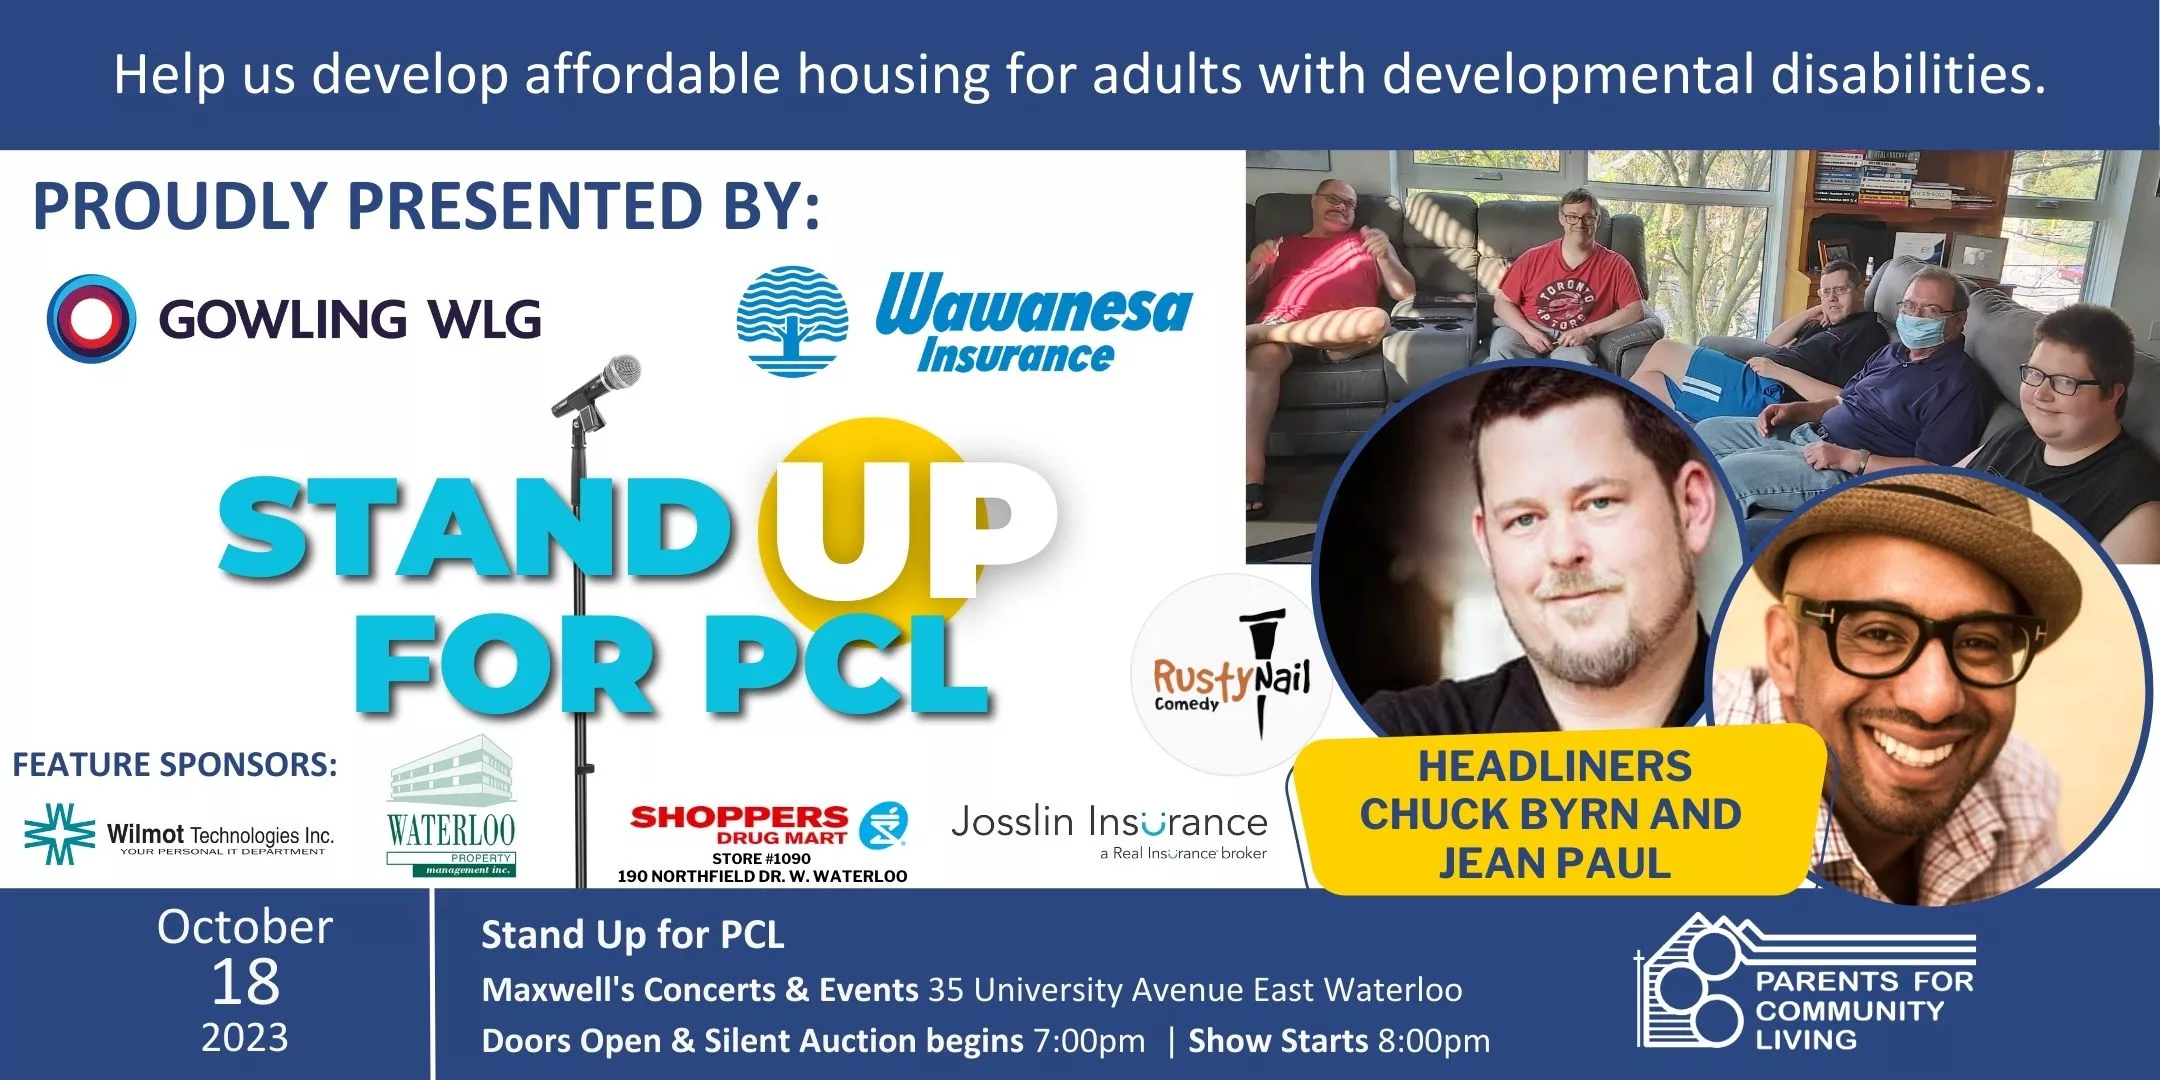 Stand Up for PCL is a fundraising event to help PCL develop housing for people with developmental disabilities.